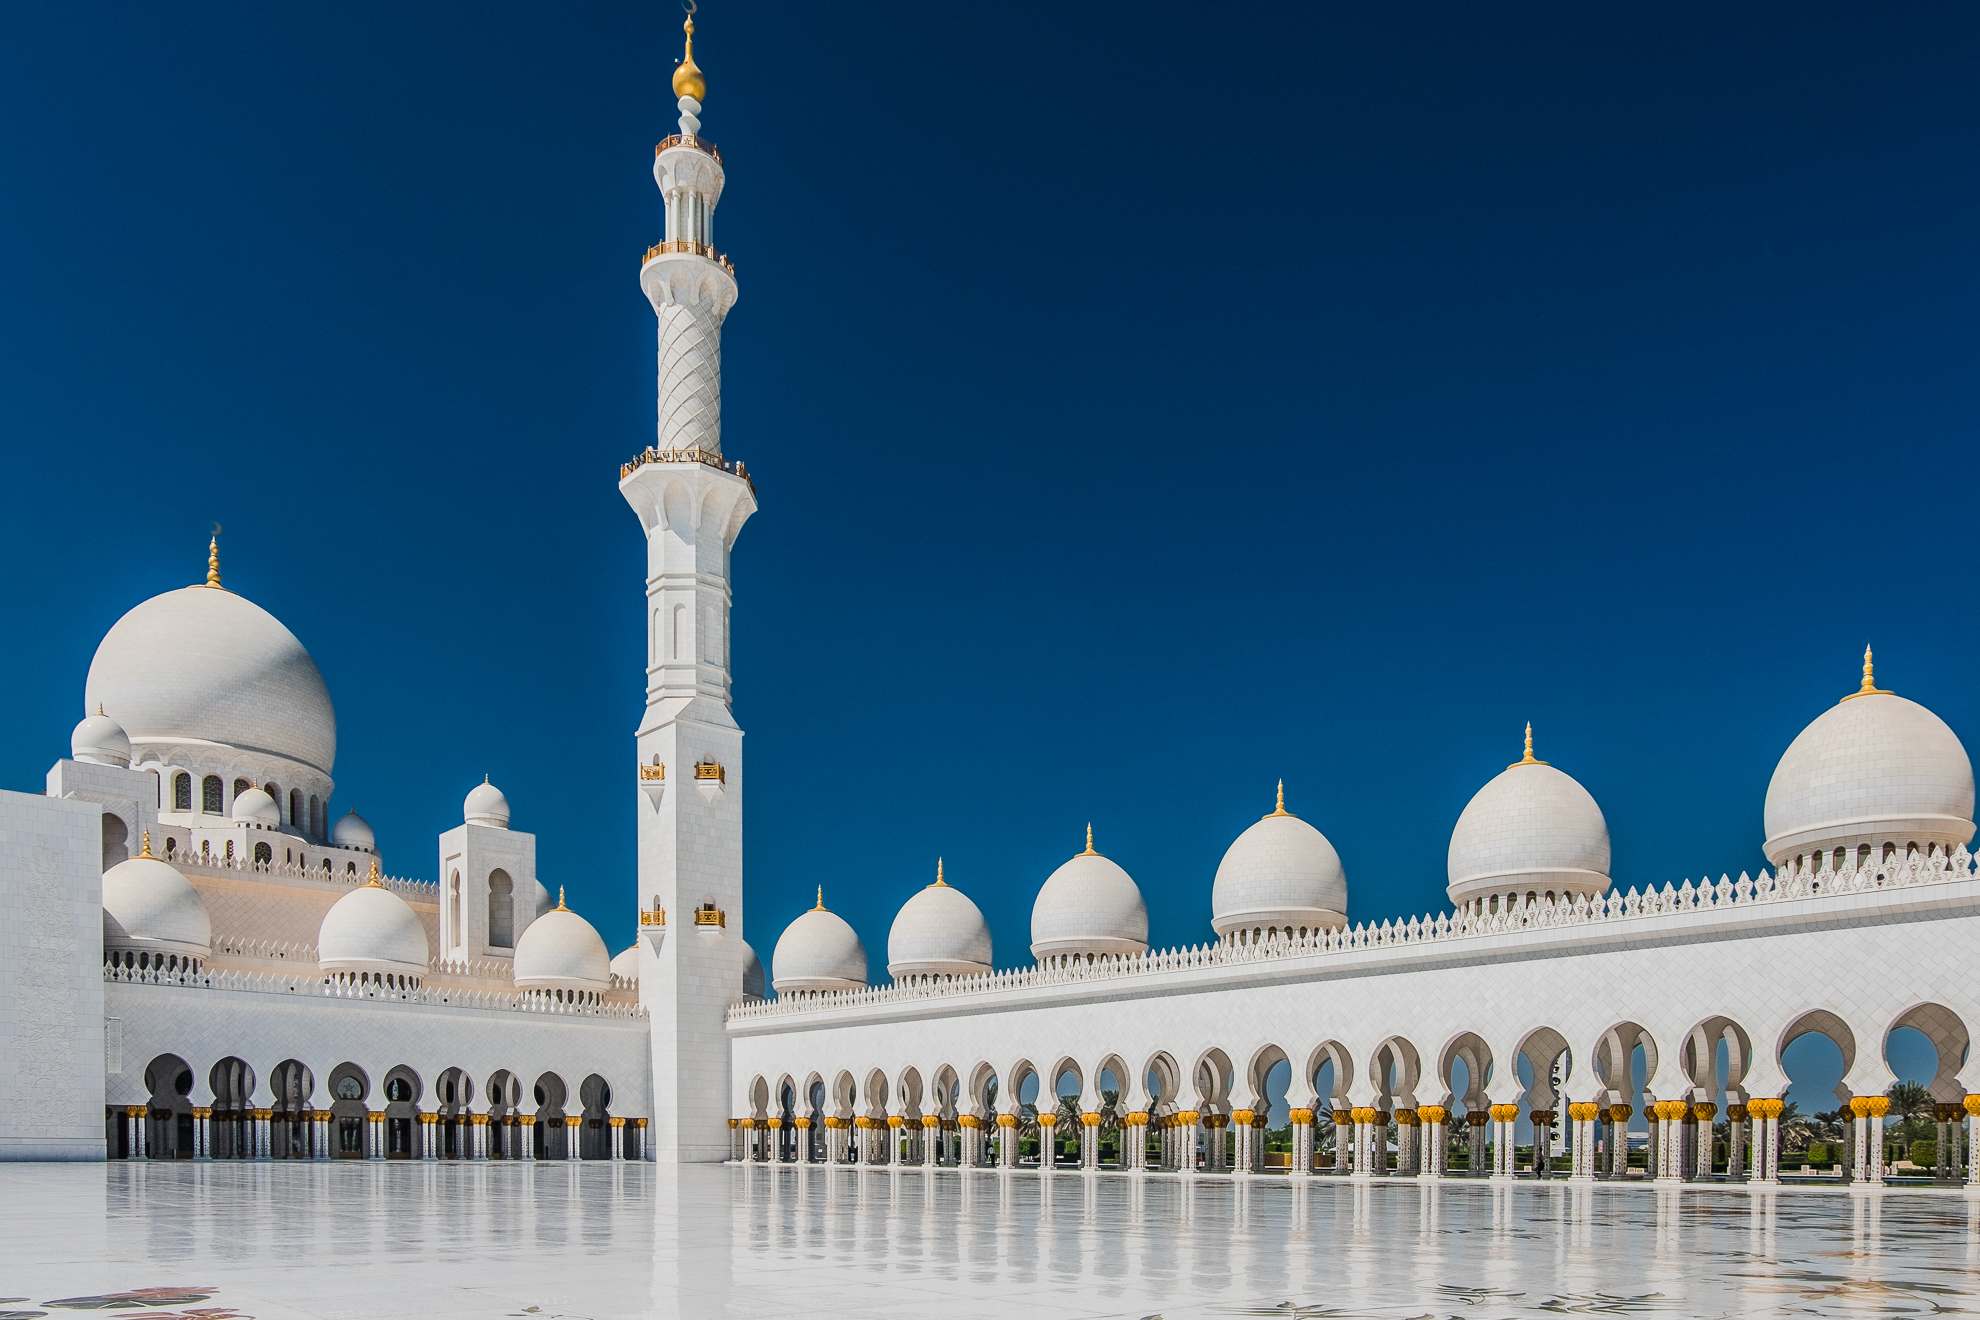 sheikh zayed grand mosque1 Picturesque Sheikh Zayed Grand Mosque in Abu Dhabi